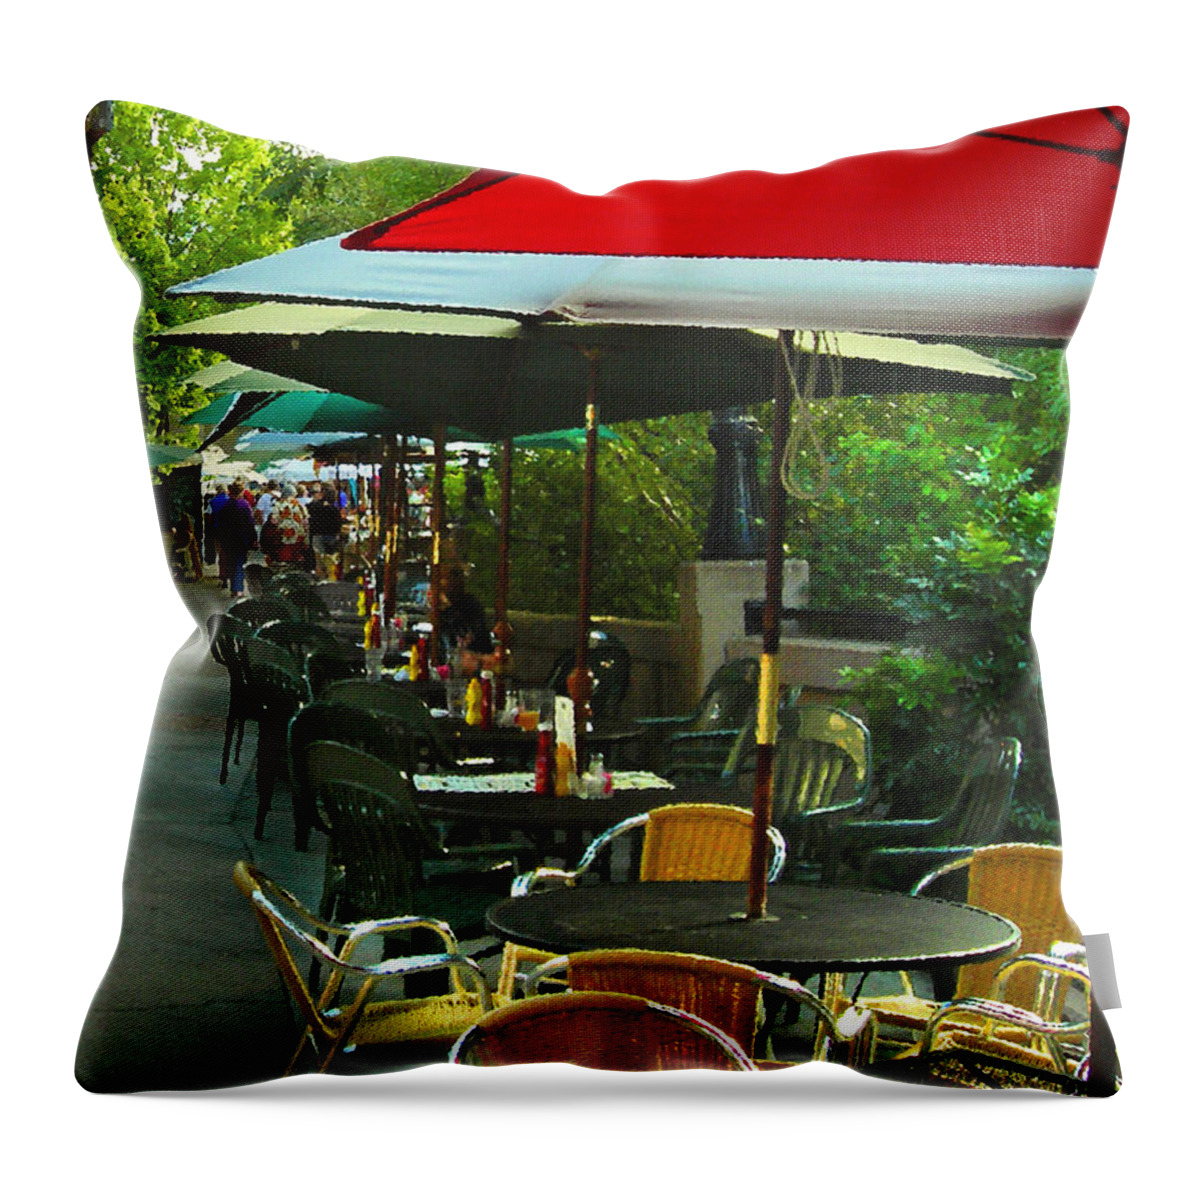 Cafe Throw Pillow featuring the photograph Dining Under The Umbrellas by James Eddy